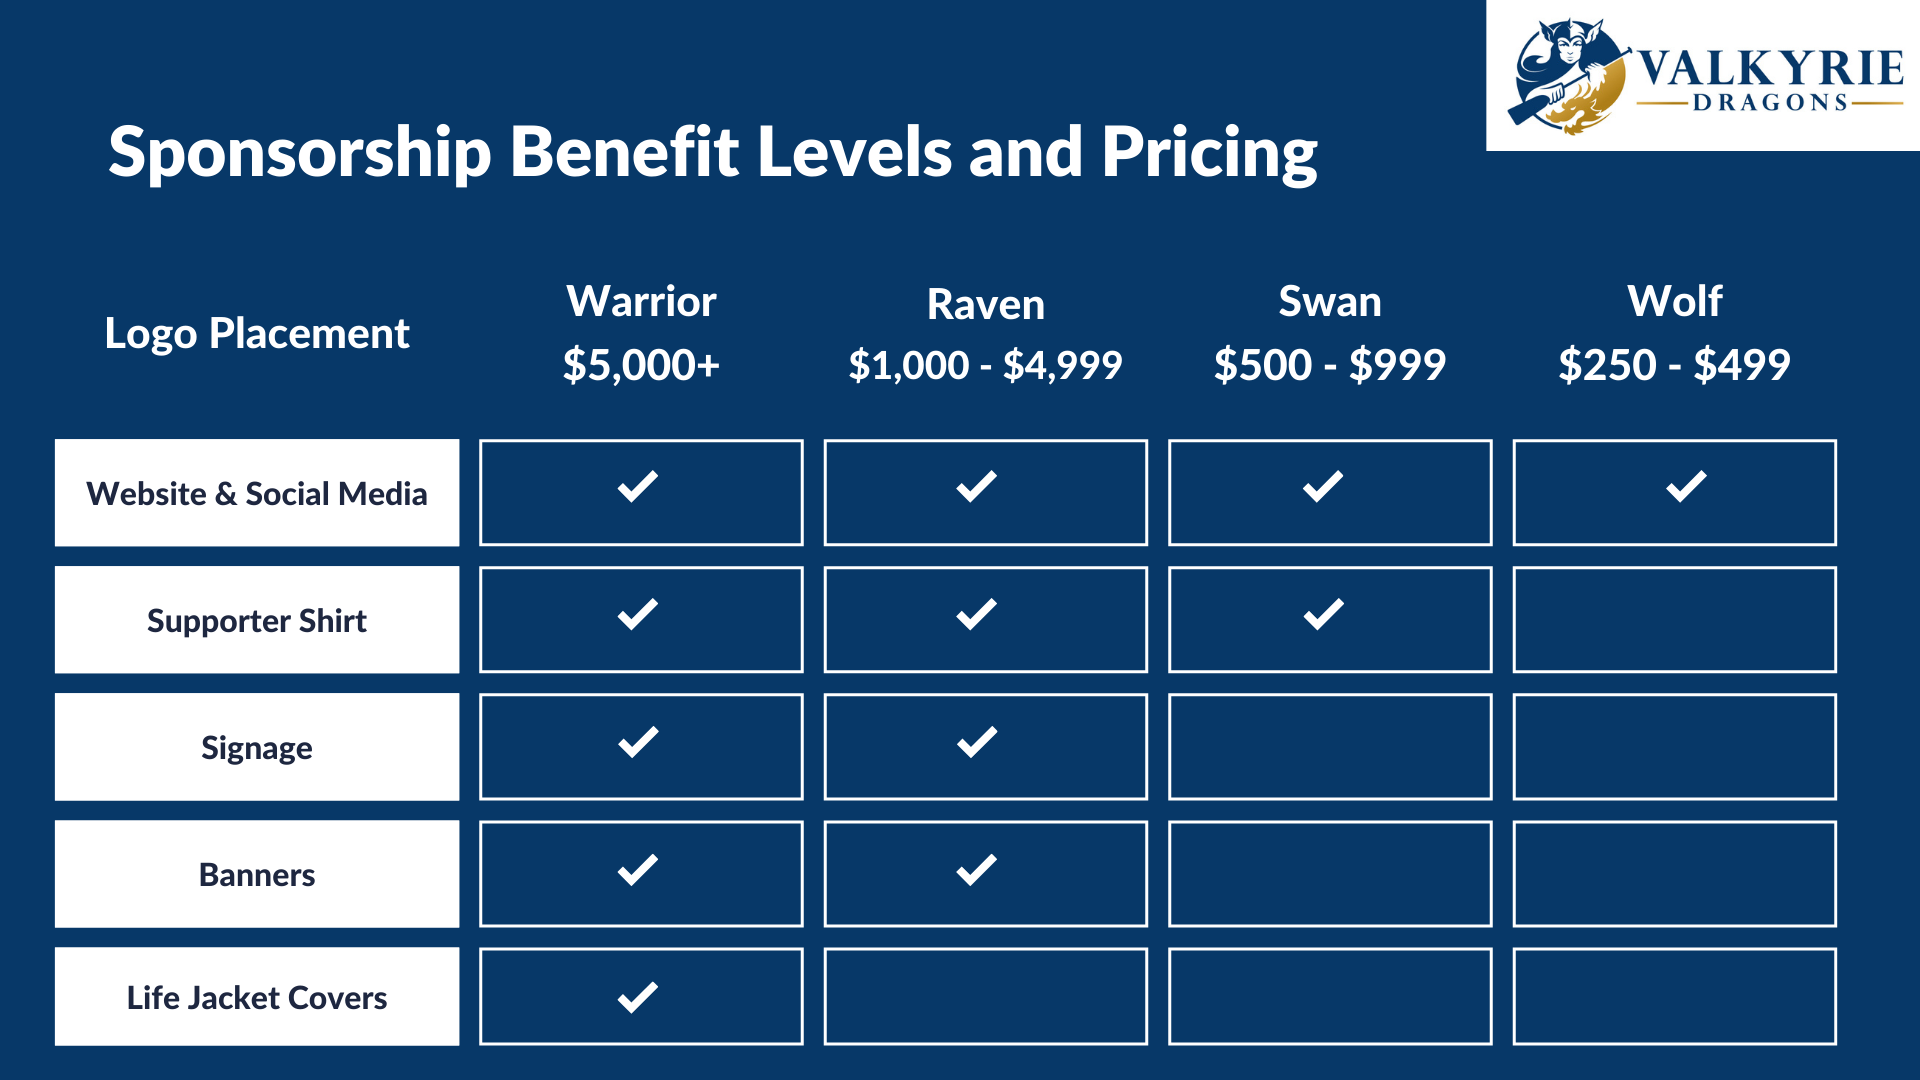 Sponsorship Benefit Levels and Pricing Chart, with four sponsorship levels beginning at $250. Logo placement options include website & social media, supporter shirt, signage, banners, and life jacket covers.